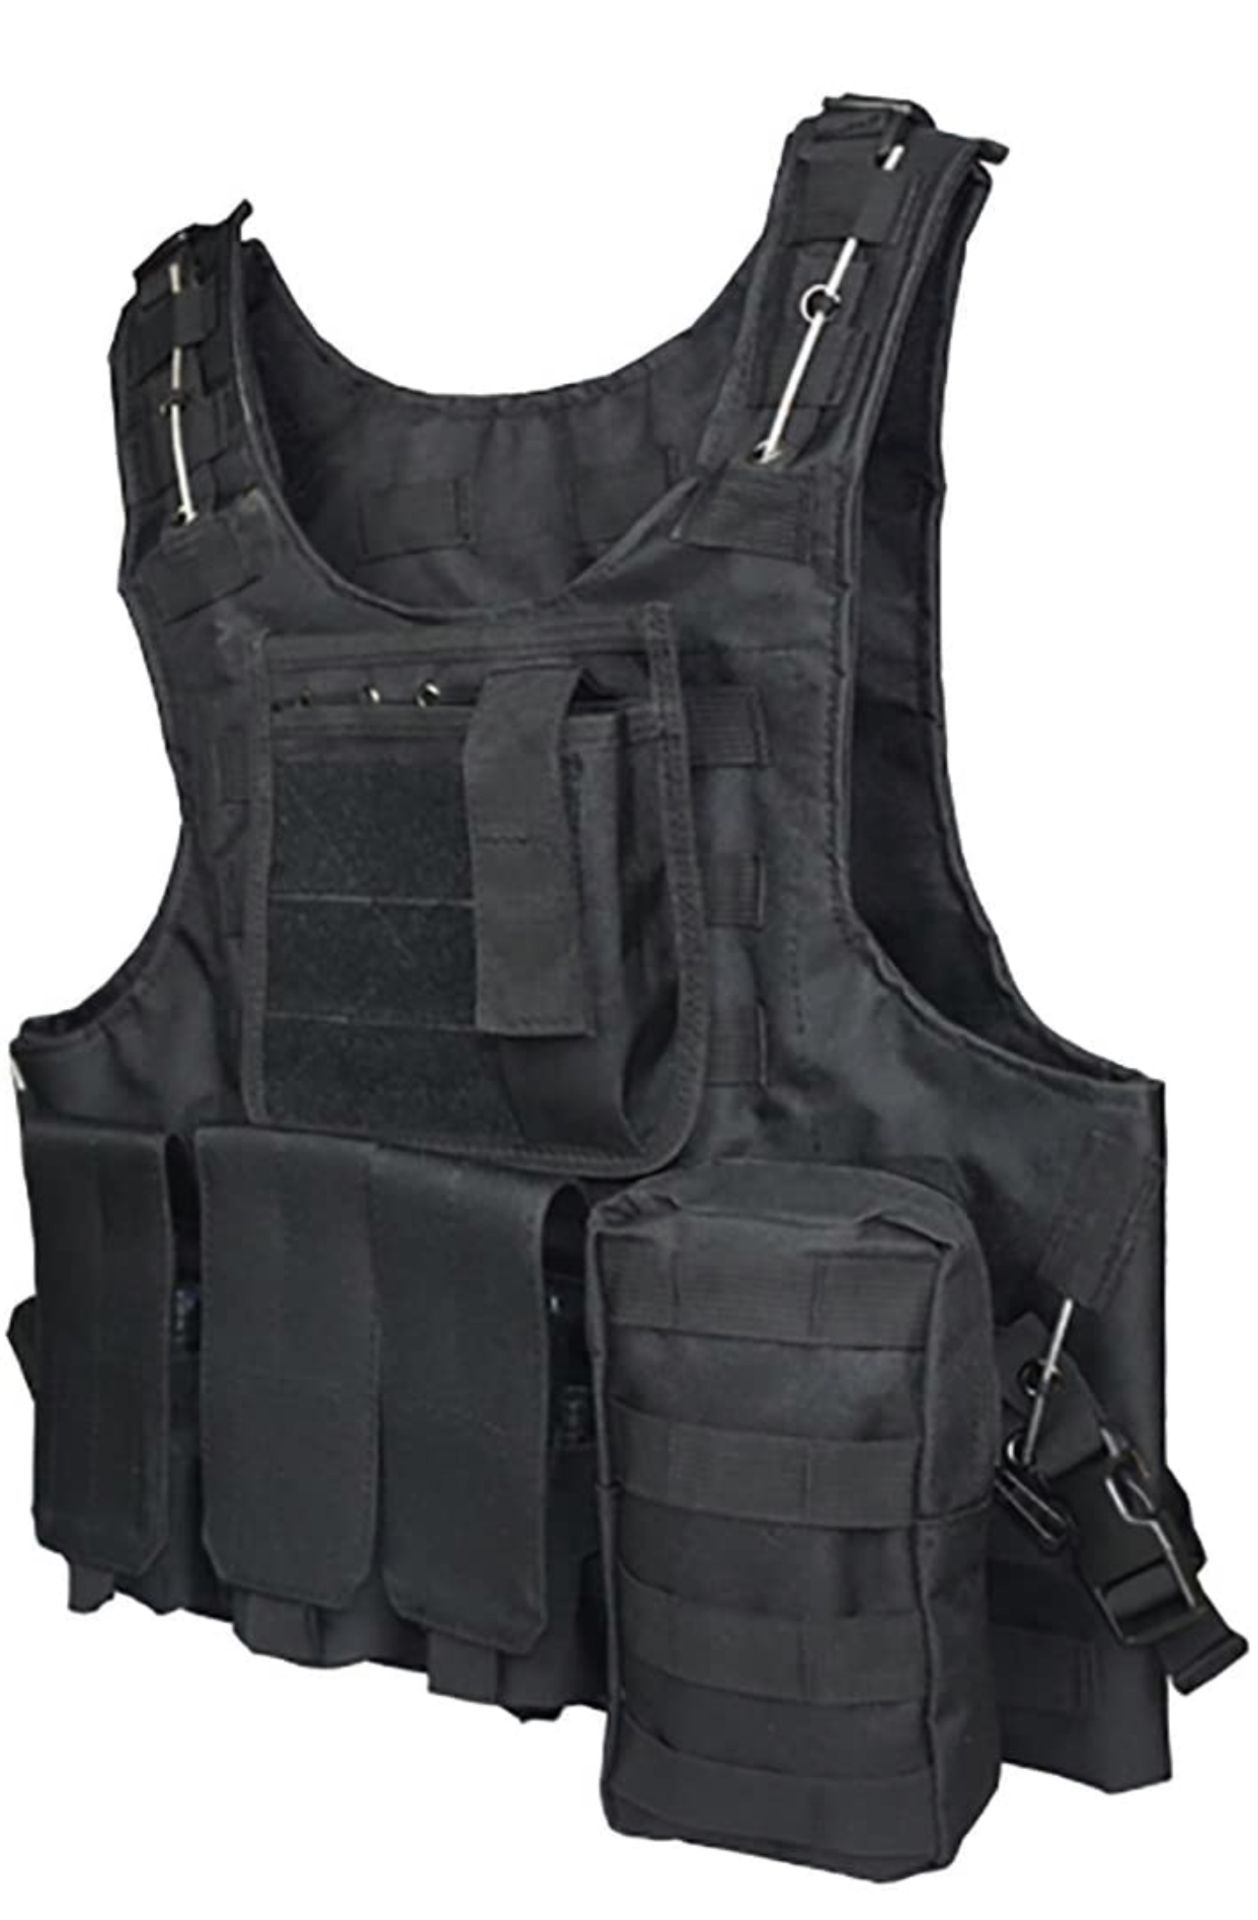 ThreeH Outdoor Tactical Vest Field Army Suit RRP £35.99